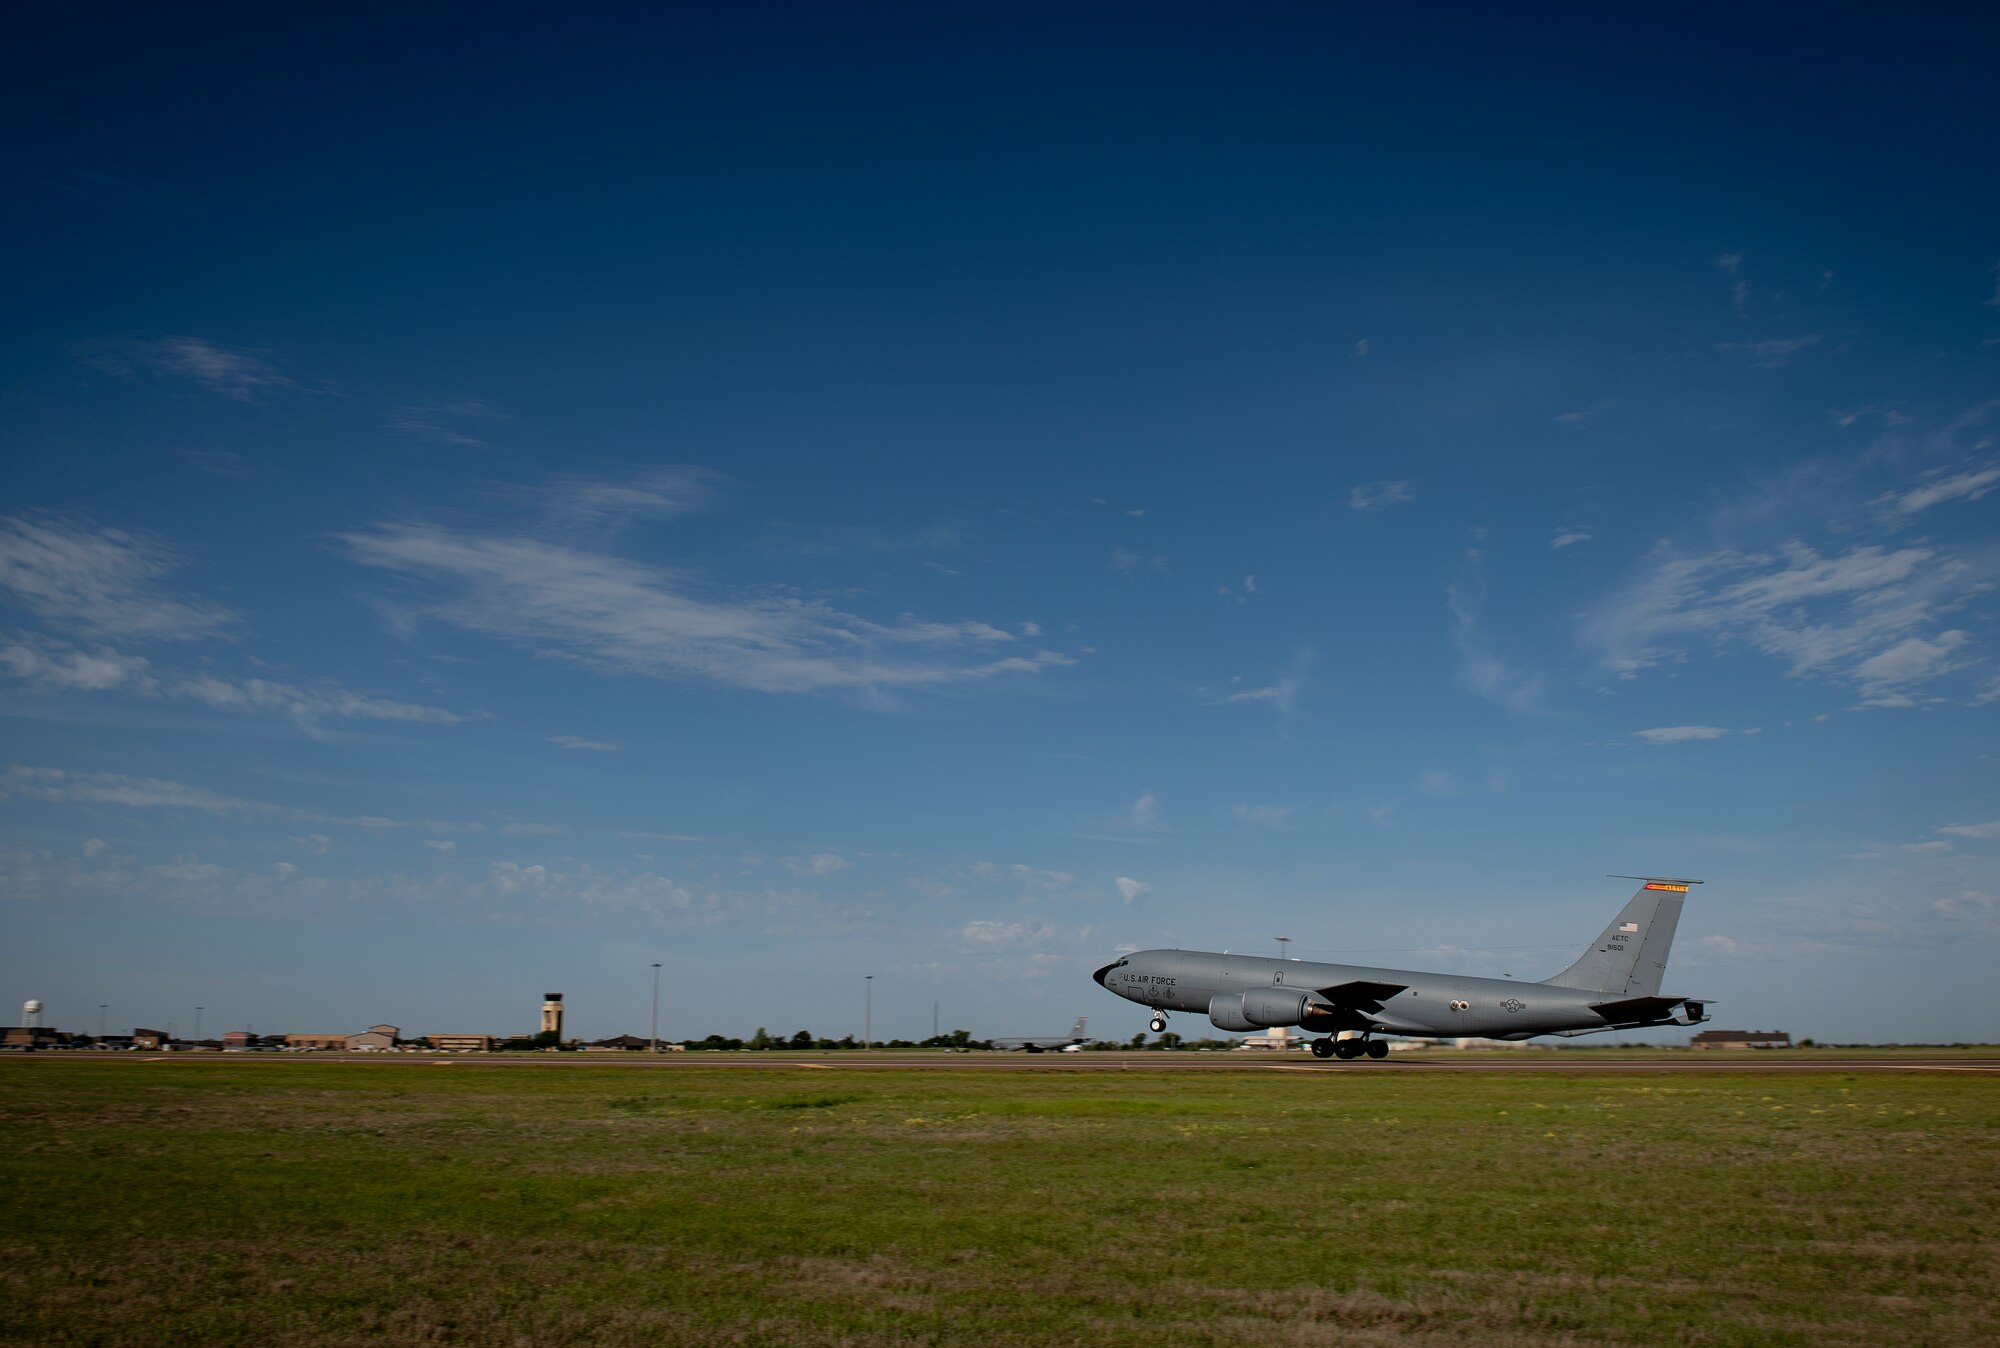 A U.S. Air Force KC-135 Stratotanker assigned to the 54th Air Refueling Squadron, takes off from Altus Air Force Base, Oklahoma, in support of essential personnel fighting COVID-19, May 1, 2020.